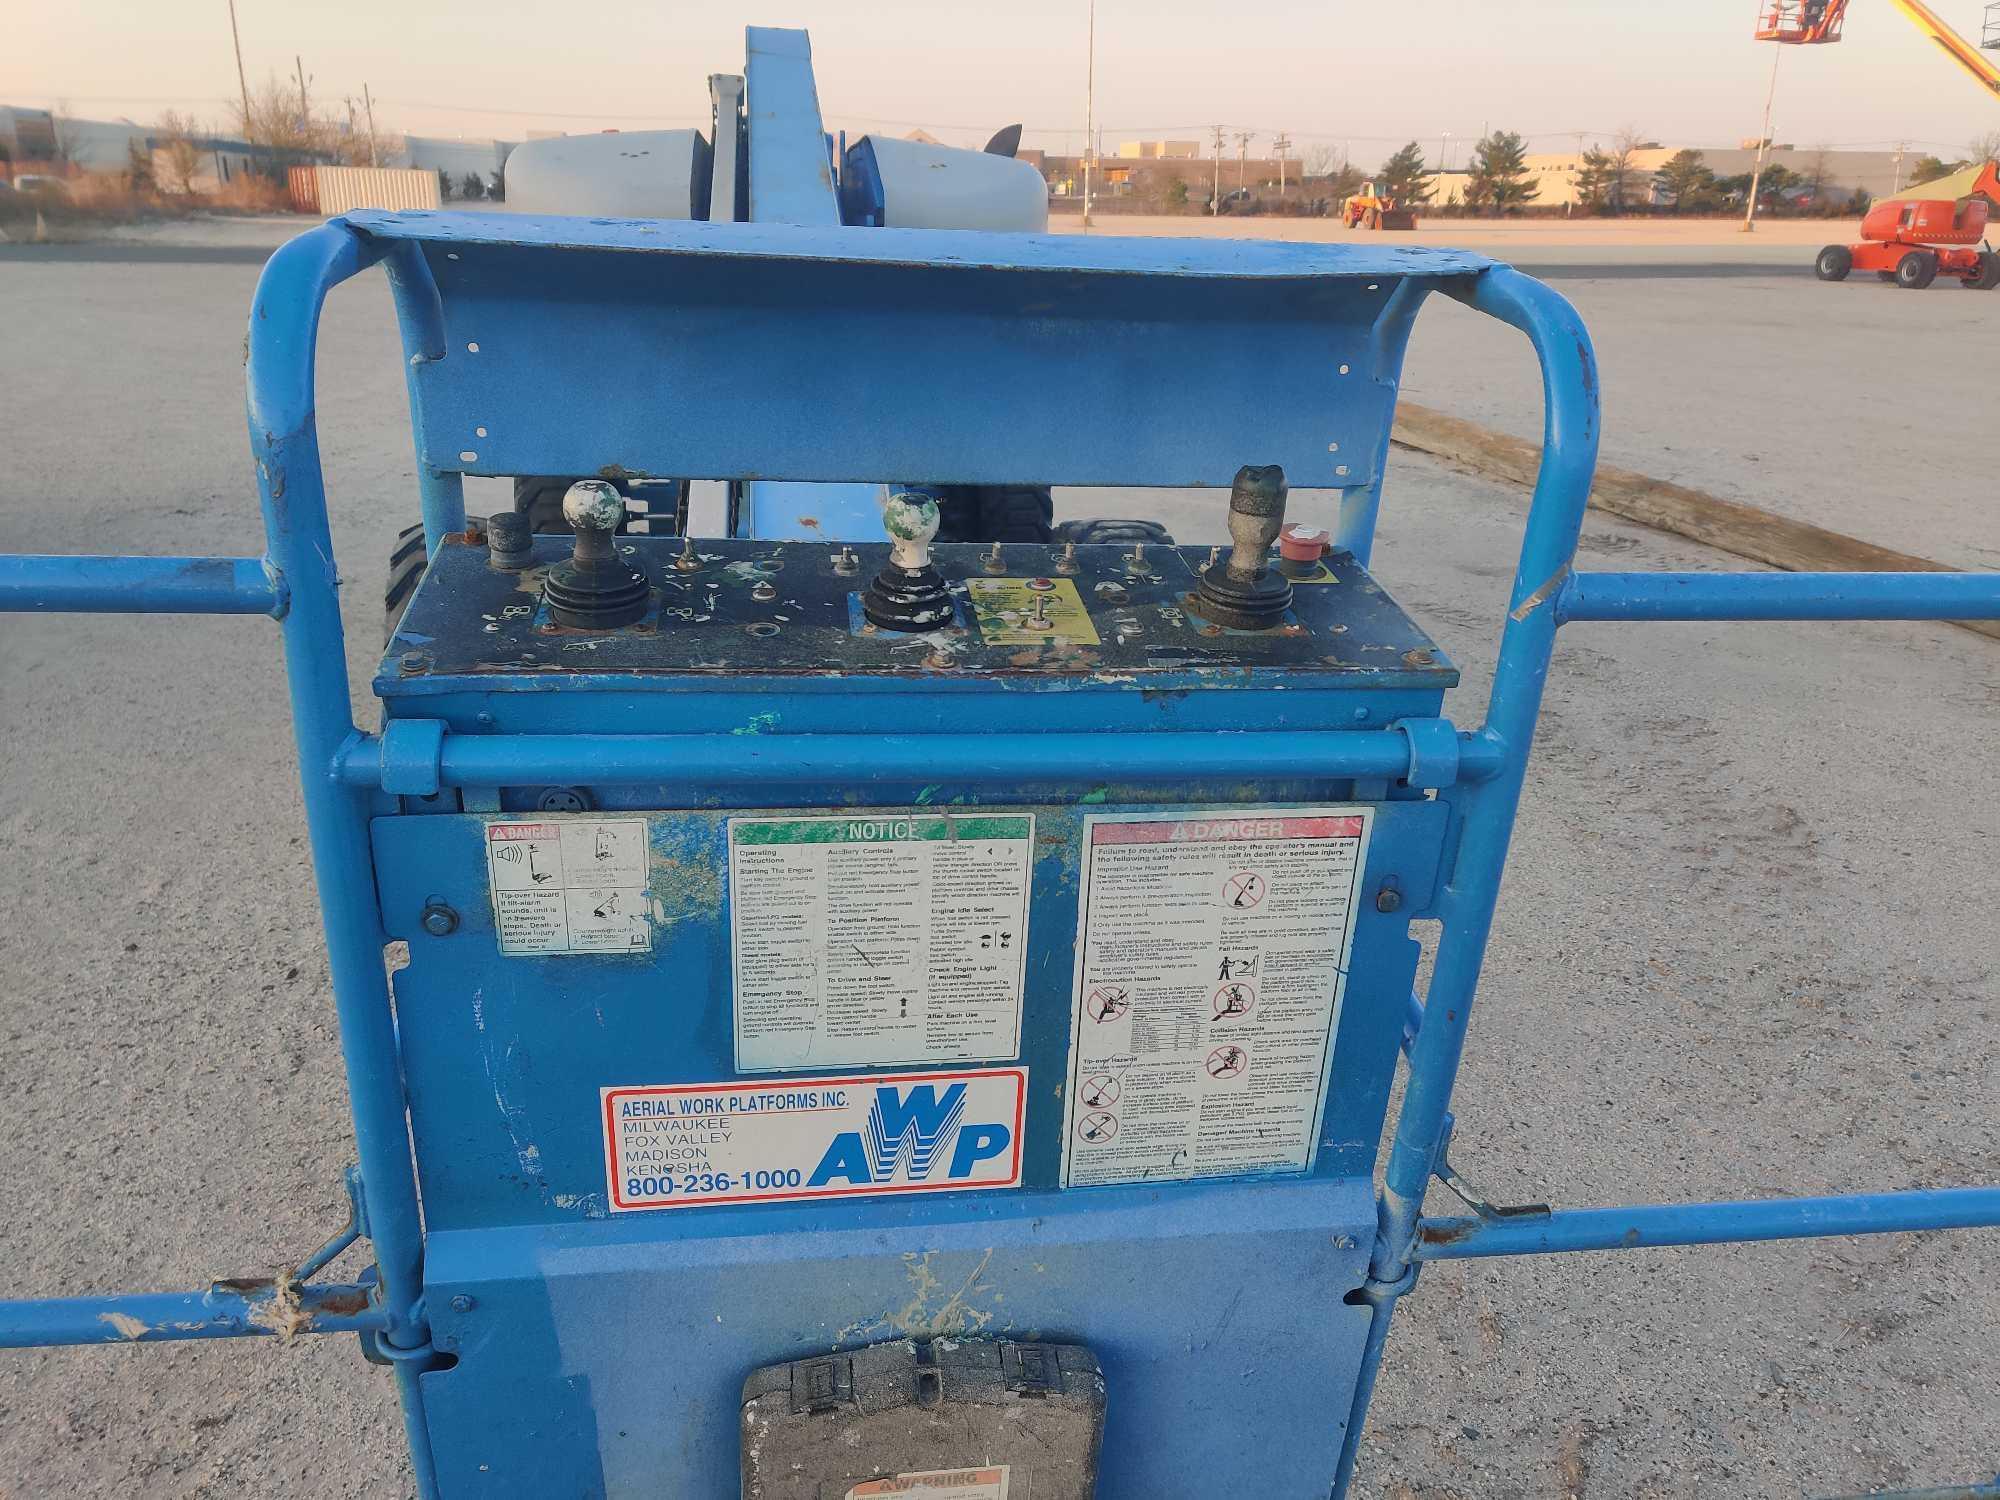 GENIE S60 BOOM LIFT SN:60049960 4x4, powered by diesel engine, equipped with 60ft. Platform height,